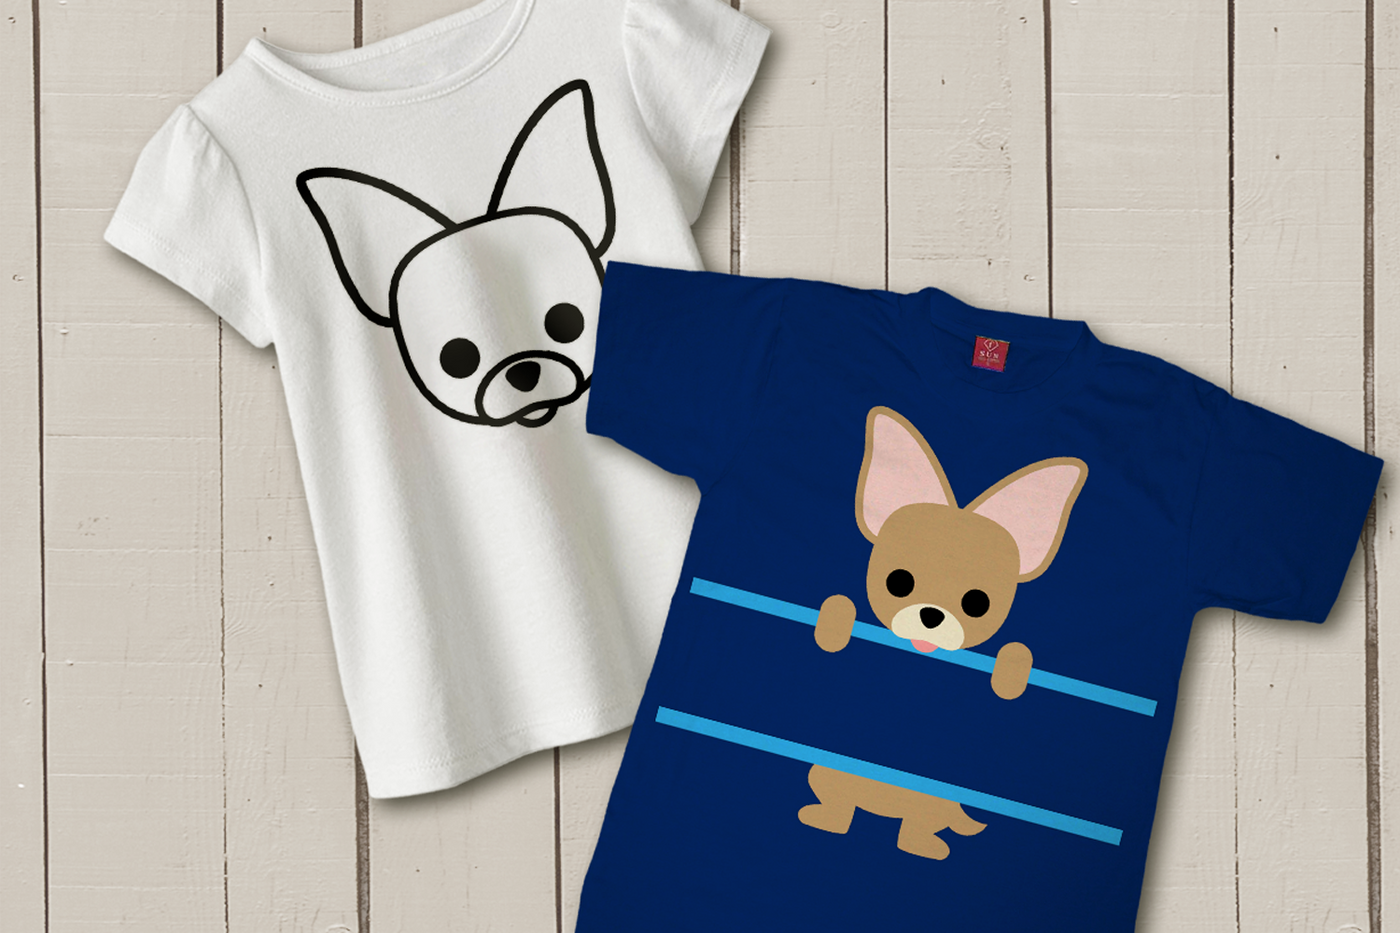 Chihuahua face and chihuahua split SVG design.